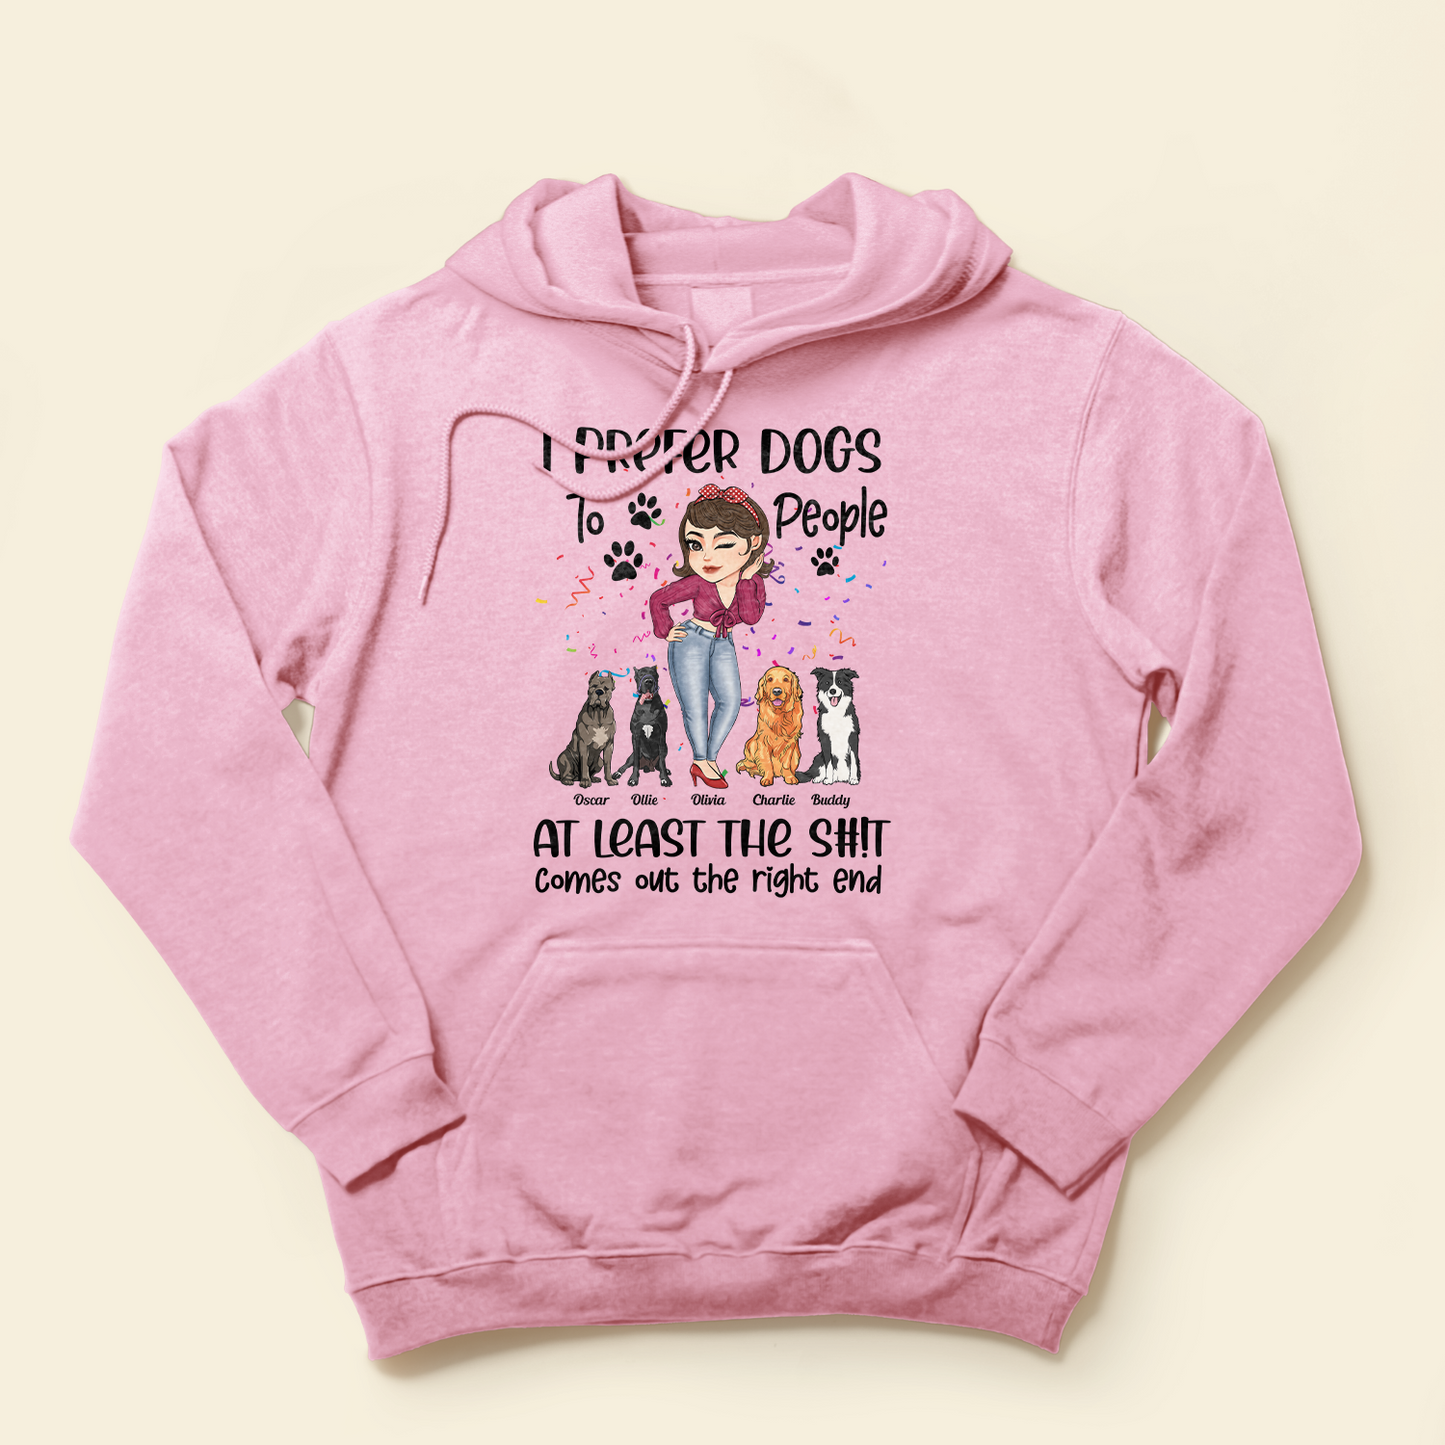 Prefer Dogs To People - Personalized Shirt - Birthday Gift For Dog Mom, Dog Lover - Chibi Girl